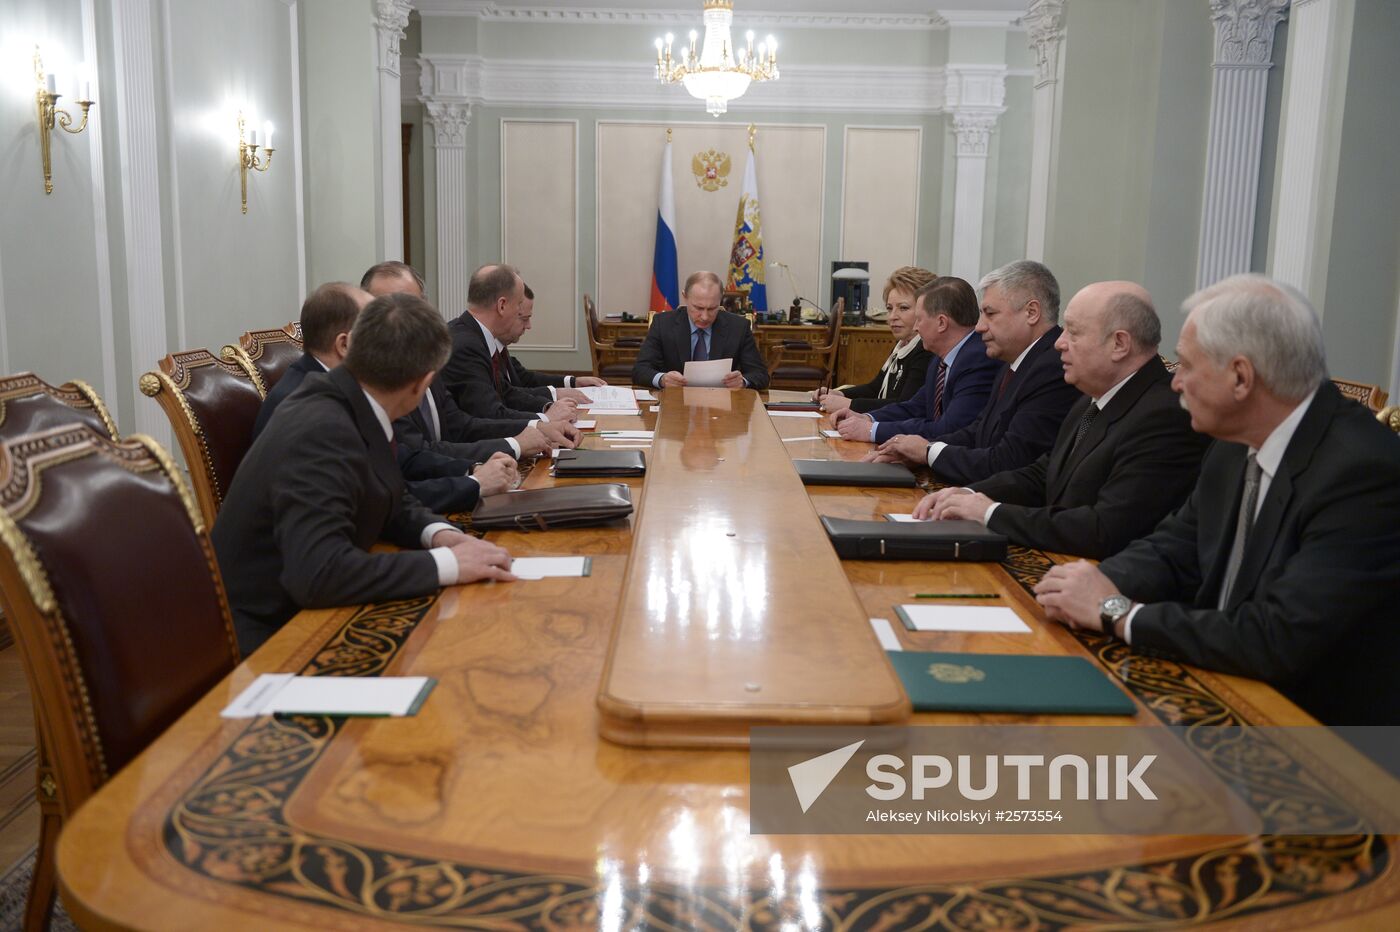 President Putin chairs meeting with permanent members of Russian Security Council